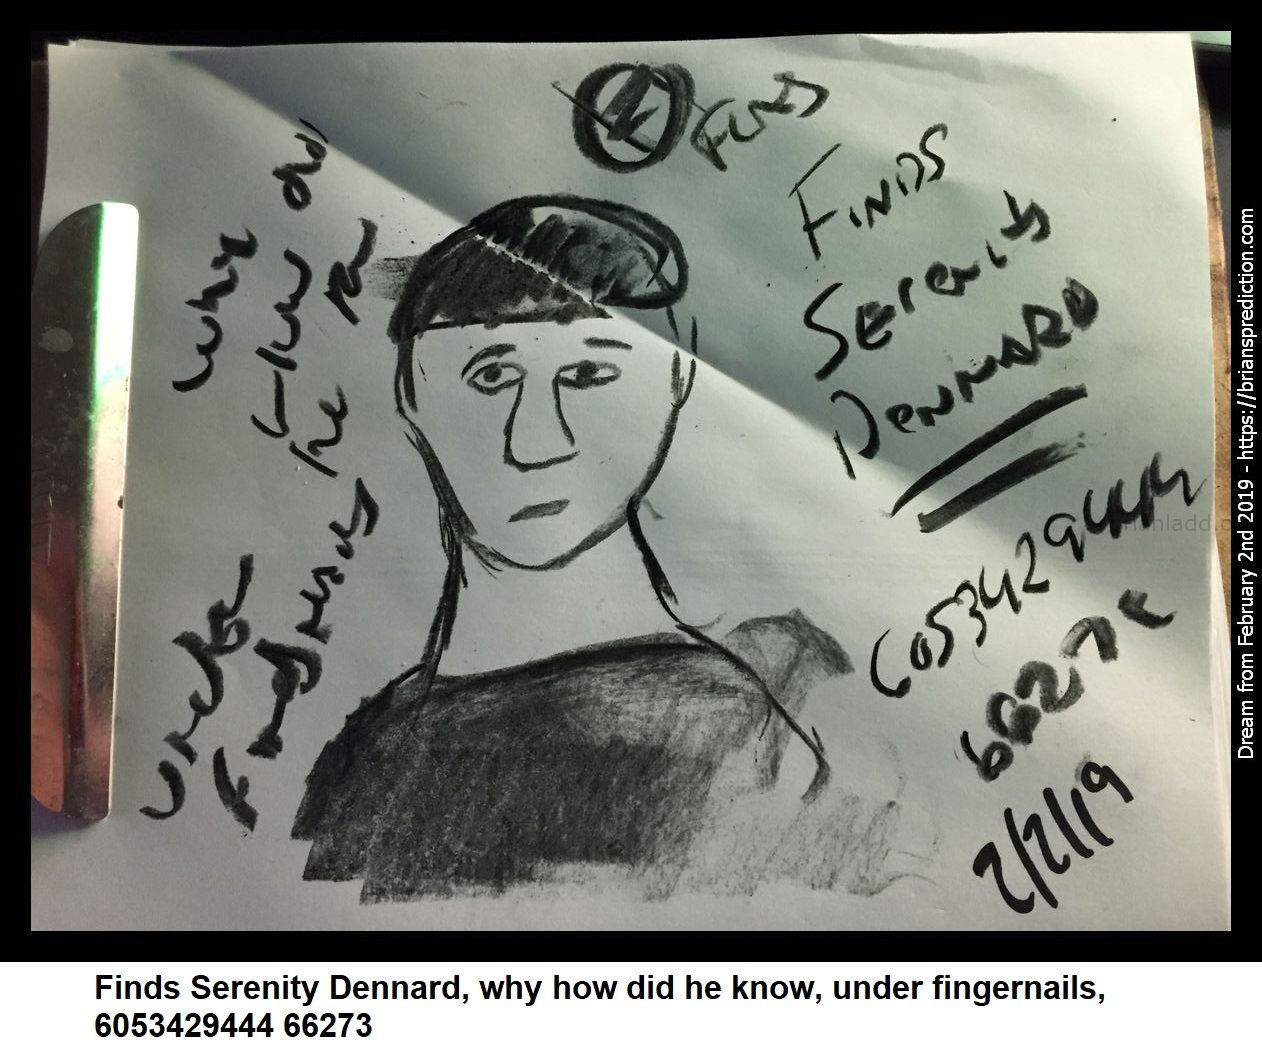 11646 2 February 2 2019 2 - Finds Serenity Dennard, Why How Did He Know, Under Fingernails, 6053429444 66273  https://Br...
Finds Serenity Dennard, Why How Did He Know, Under Fingernails, 6053429444 66273   https://briansprediction.com/Serenity
